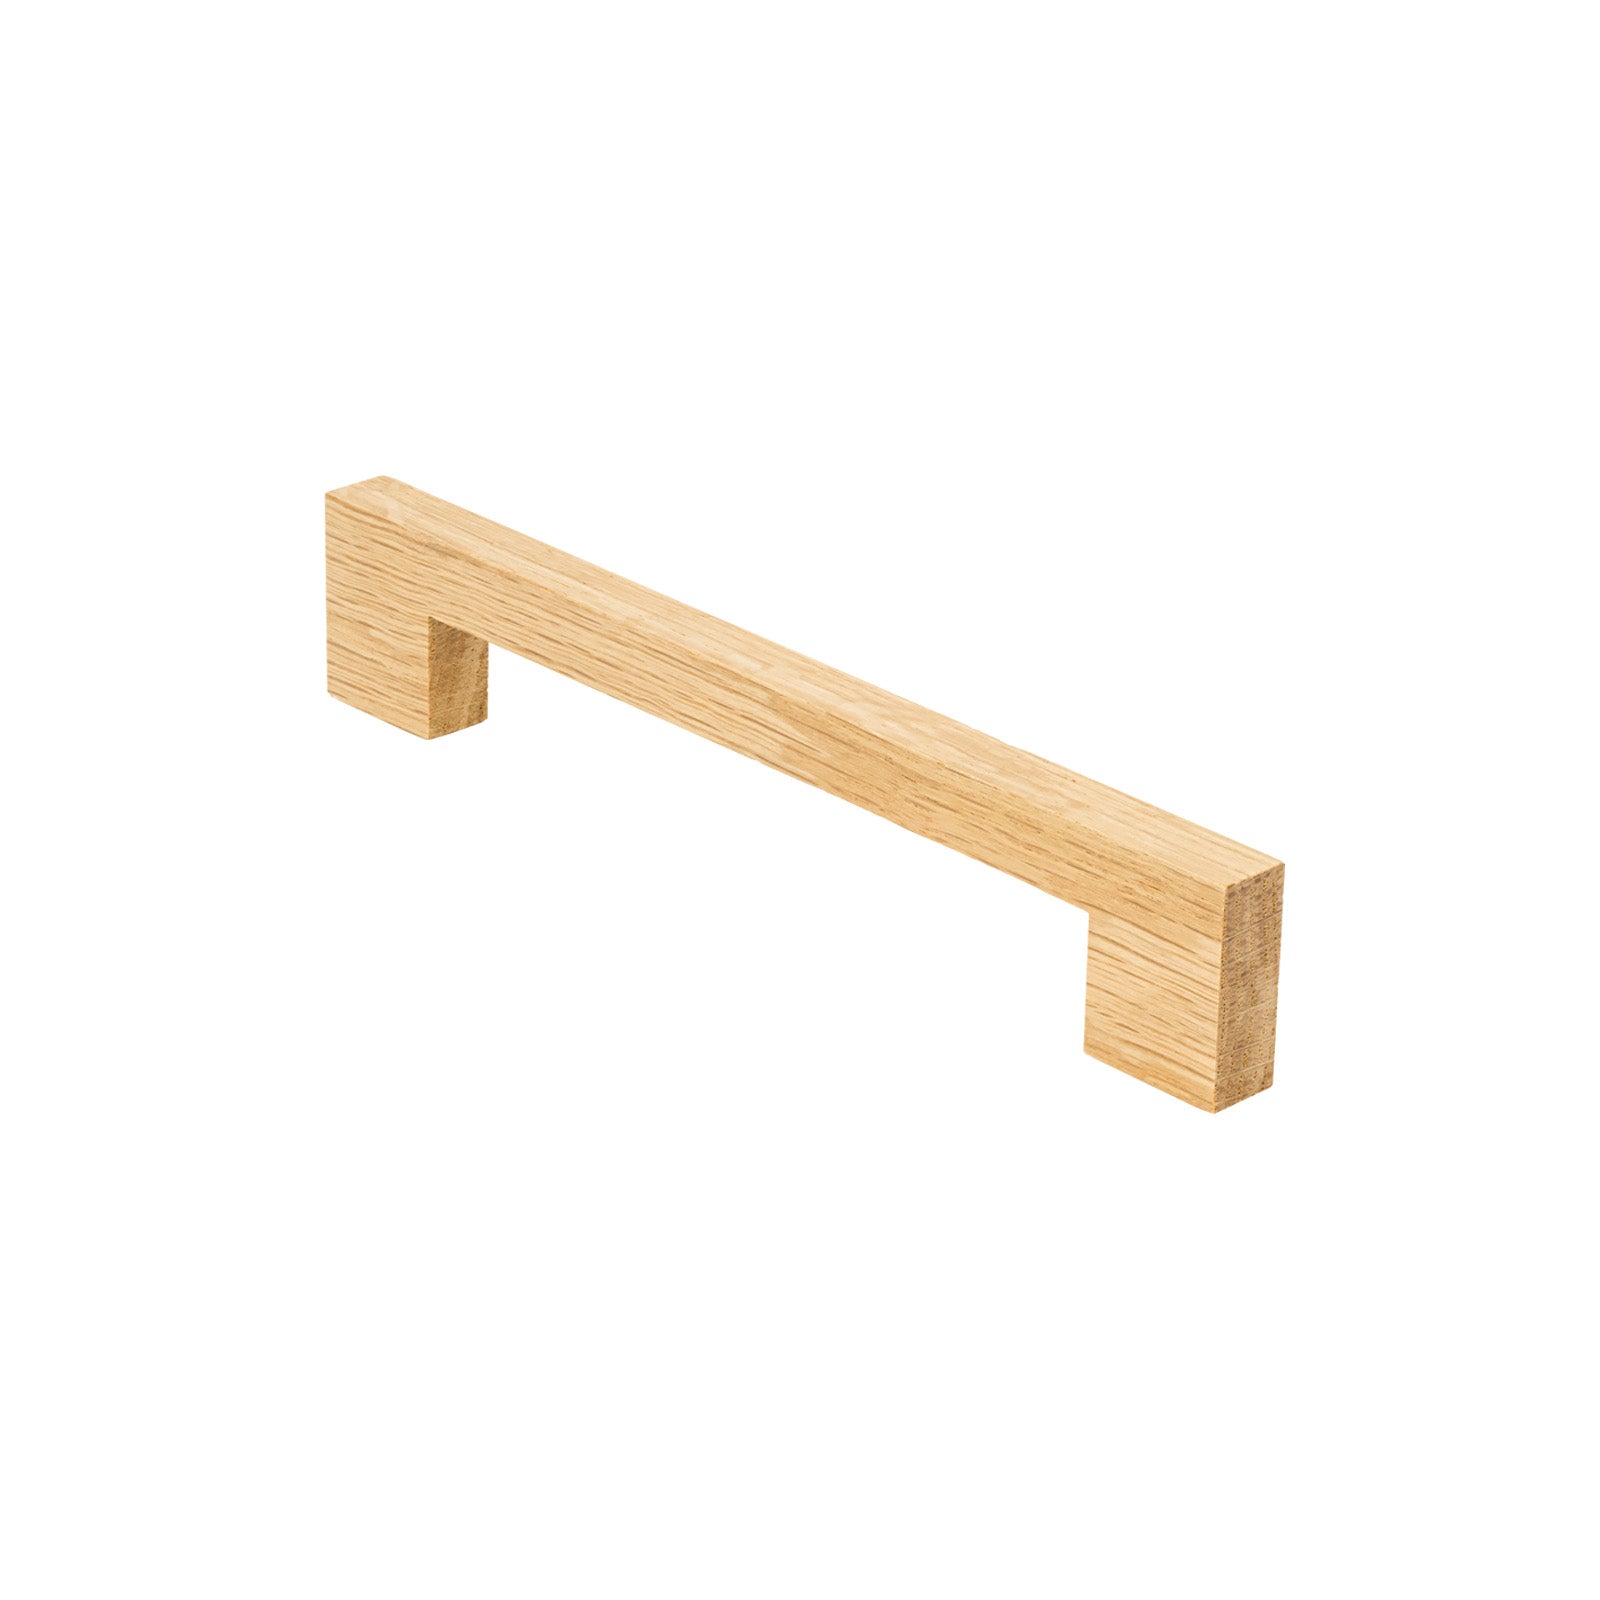 SHOW 160mm Metro Cabinet Pull Handle In Oak Finish